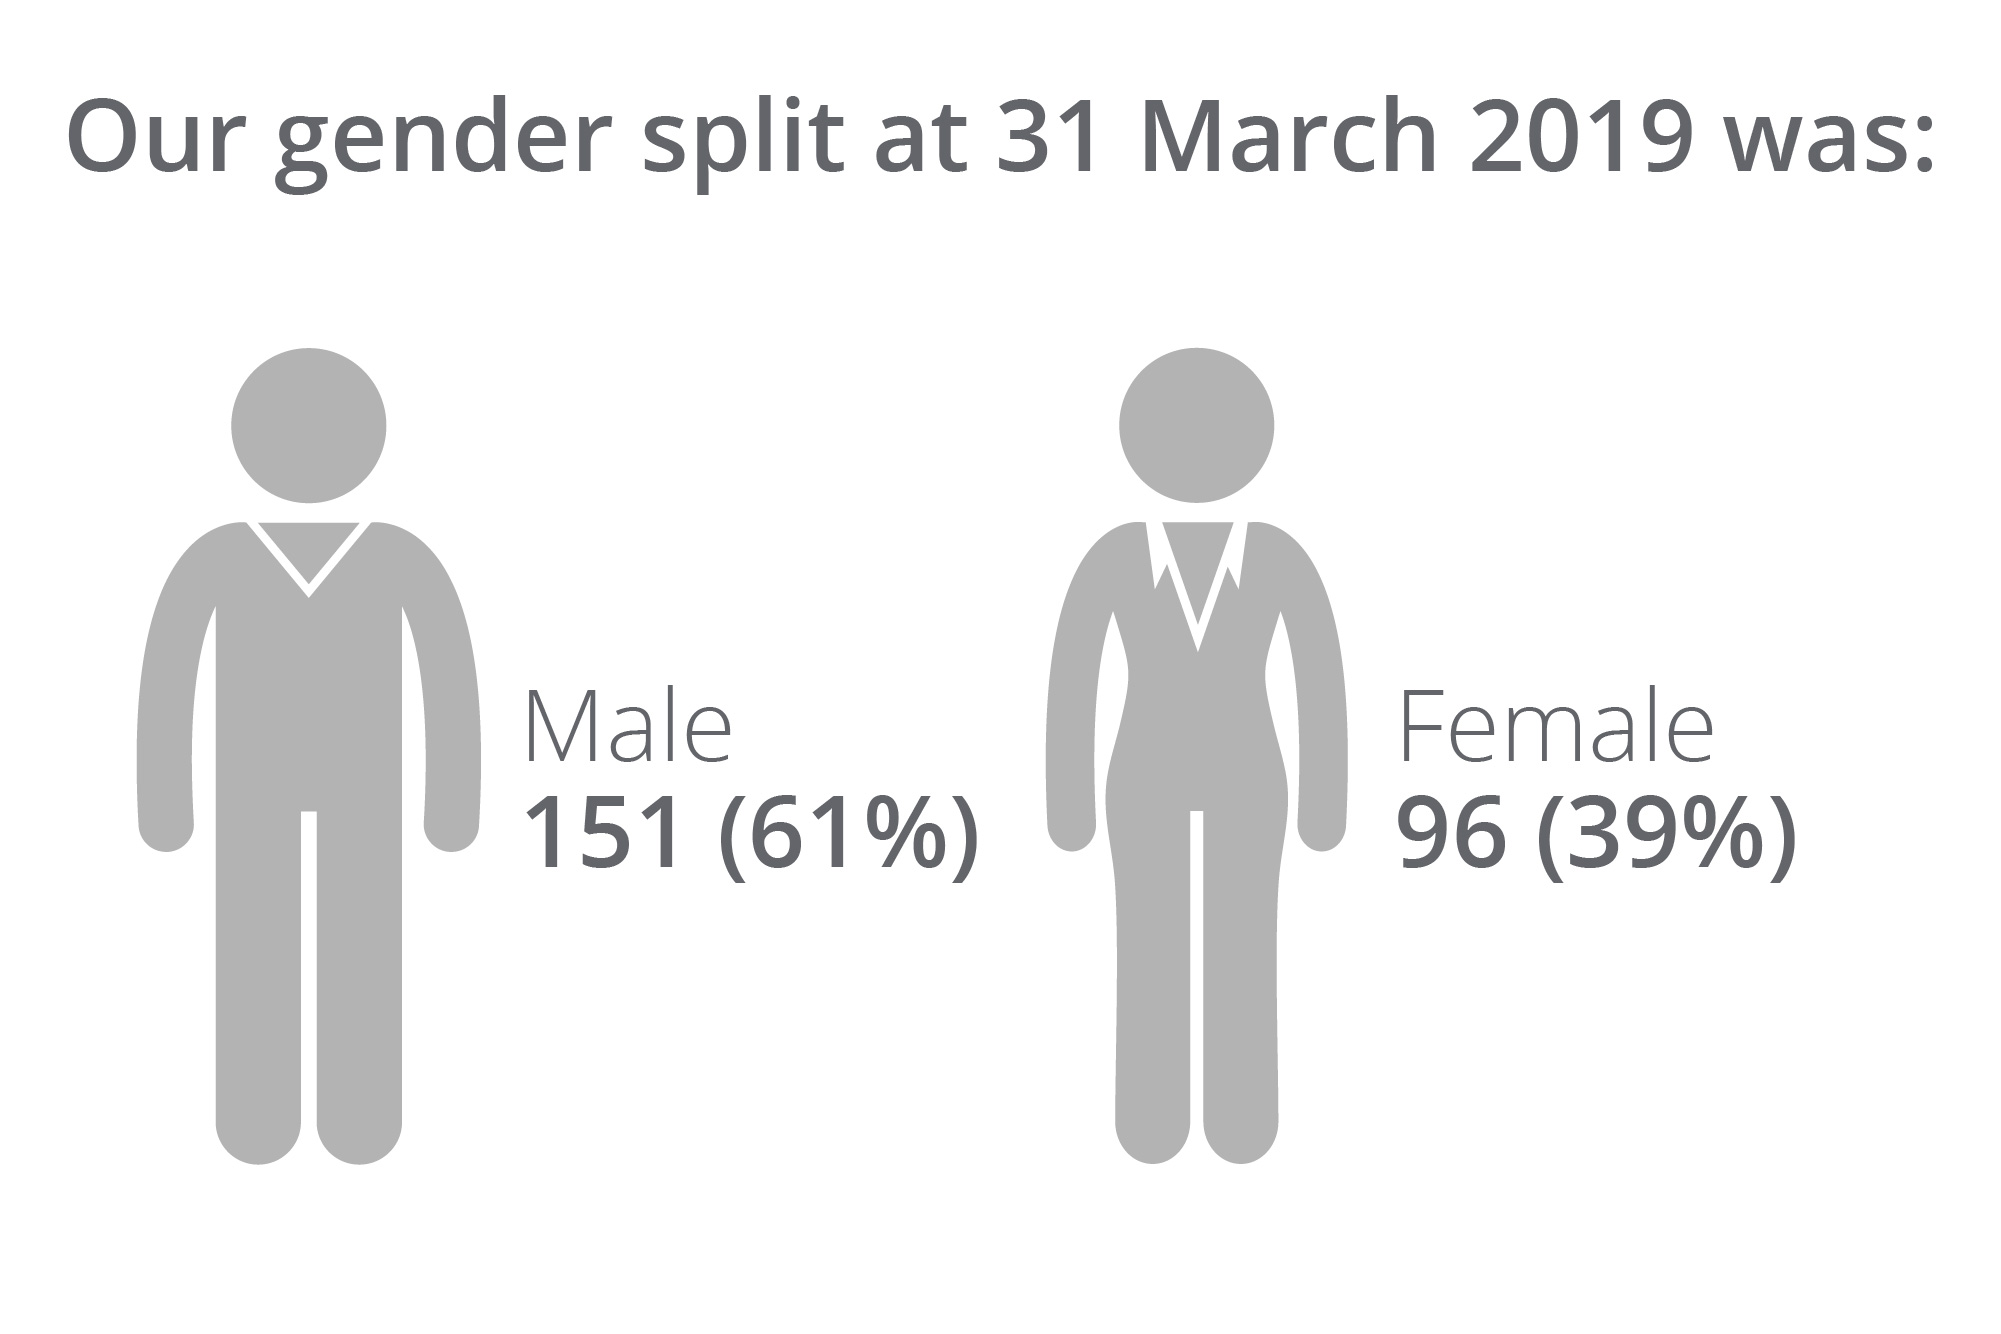 Our gender split at 31 March 2019 was: Male 151 (61%) Female 96 (39%)